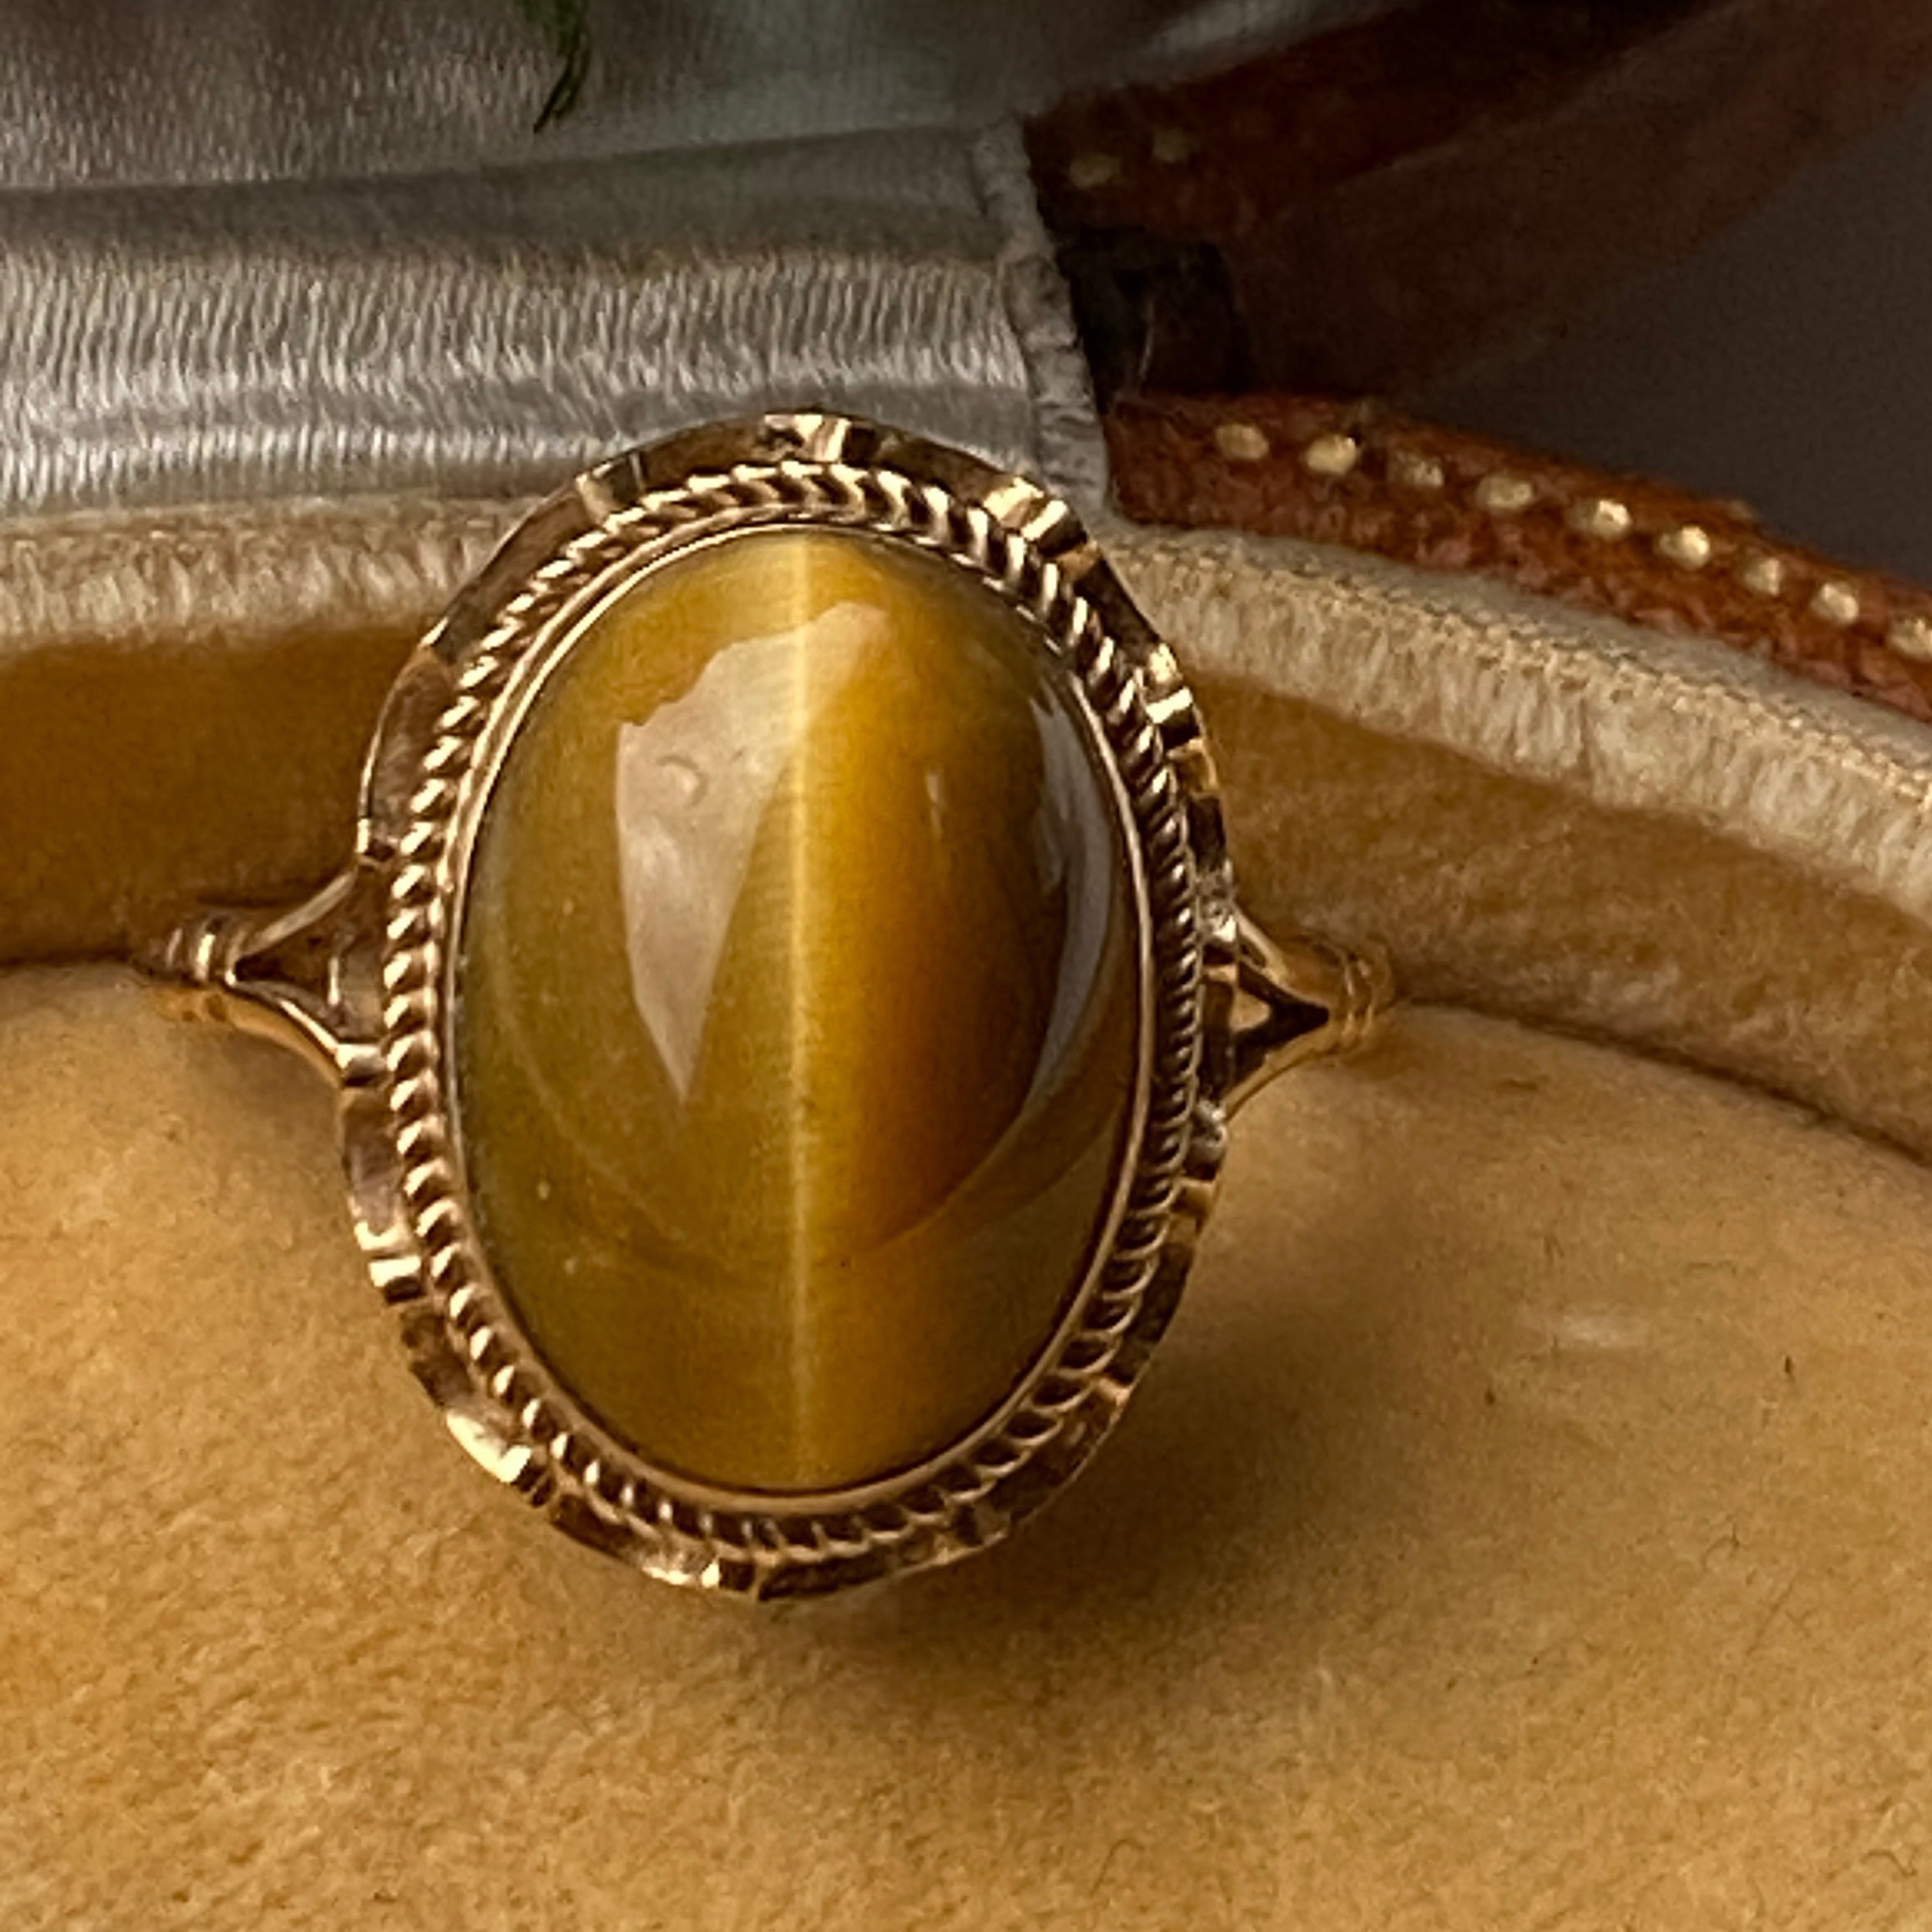 9ct Gold Tigers Eye Ring Hallmarked Size N 1/2 or 7 US.